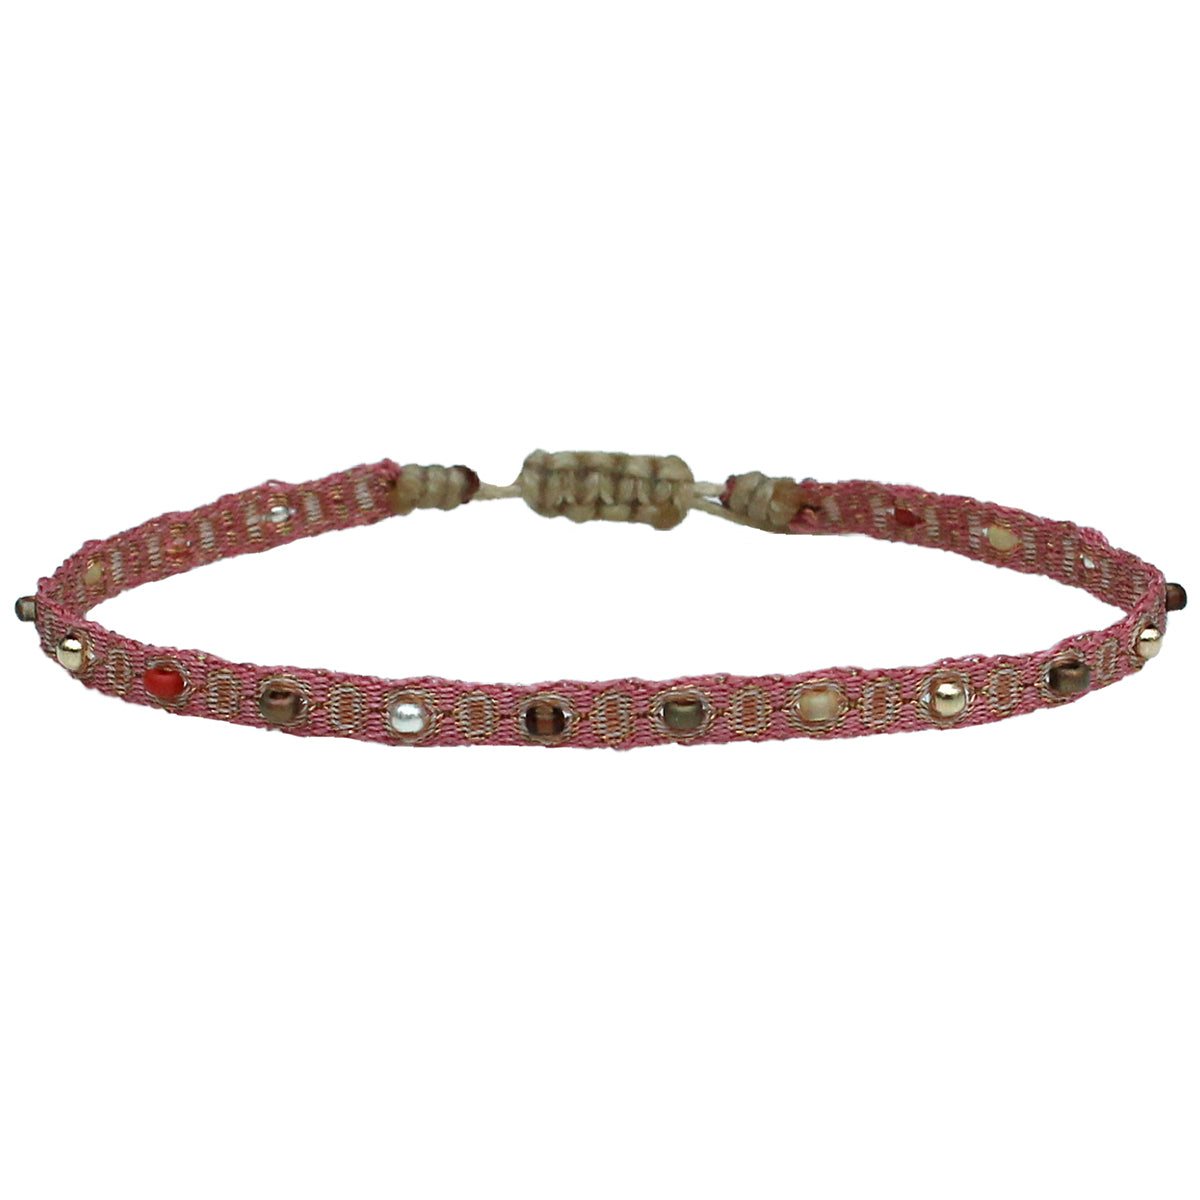 COLOURFUL HANDWOVEN BRACELET IN PINK TONES AND SILVER DETAILS